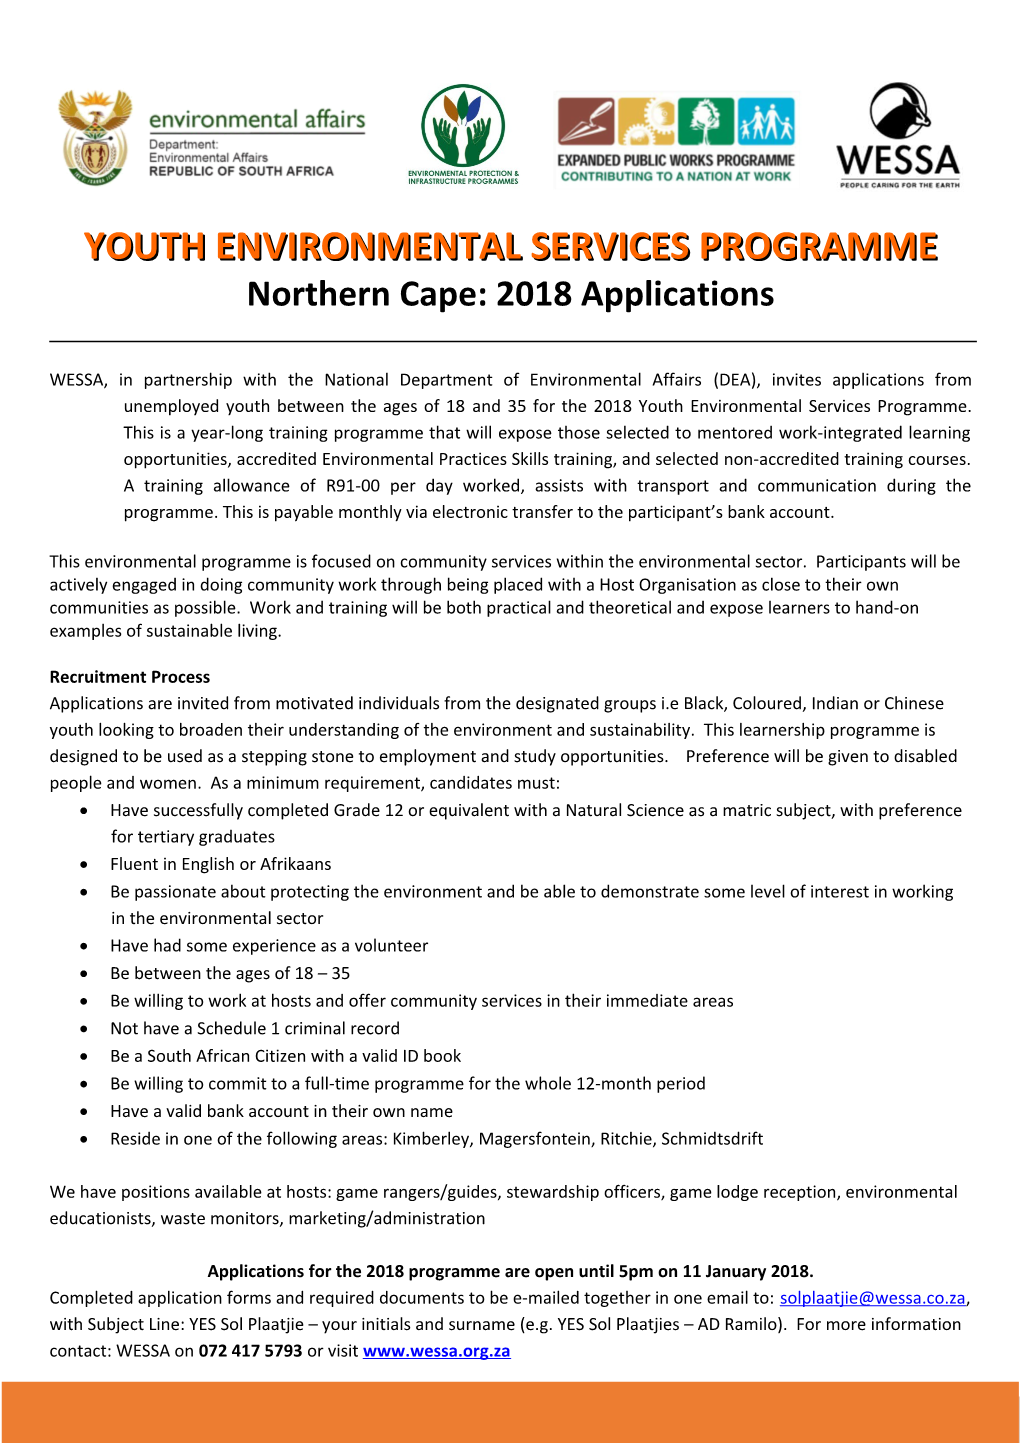 YOUTH ENVIRONMENTAL SERVICES Programmenorthern Cape: 2018 Applications